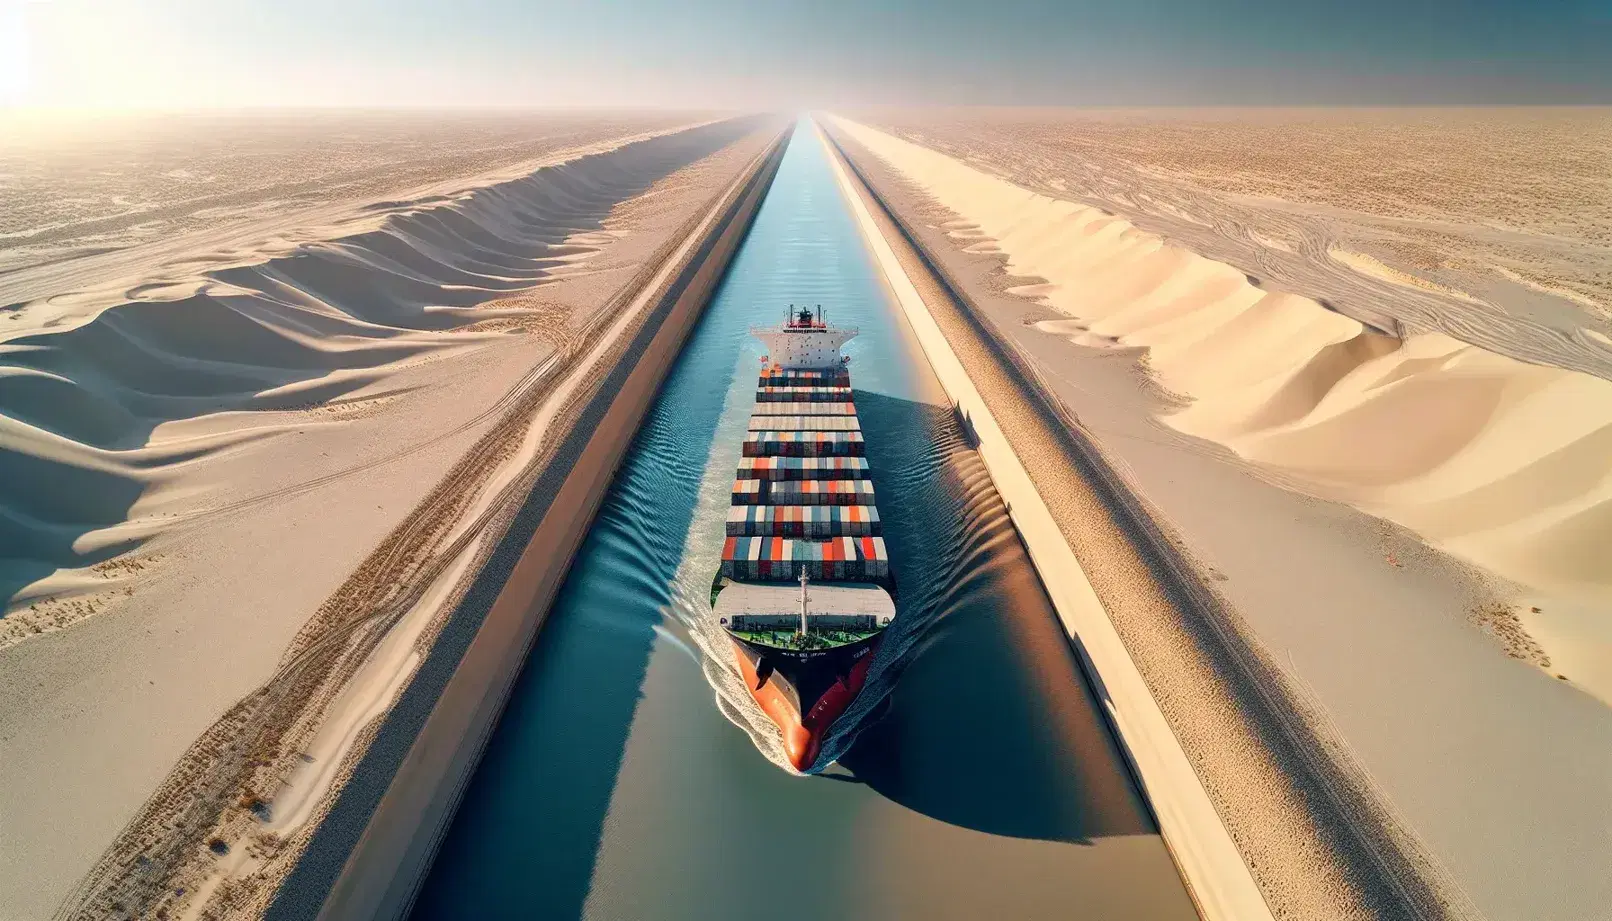 Cargo ship with multicolored containers traverses a desert canal, reflecting the sun in the calm blue water, flanked by sparse vegetation.